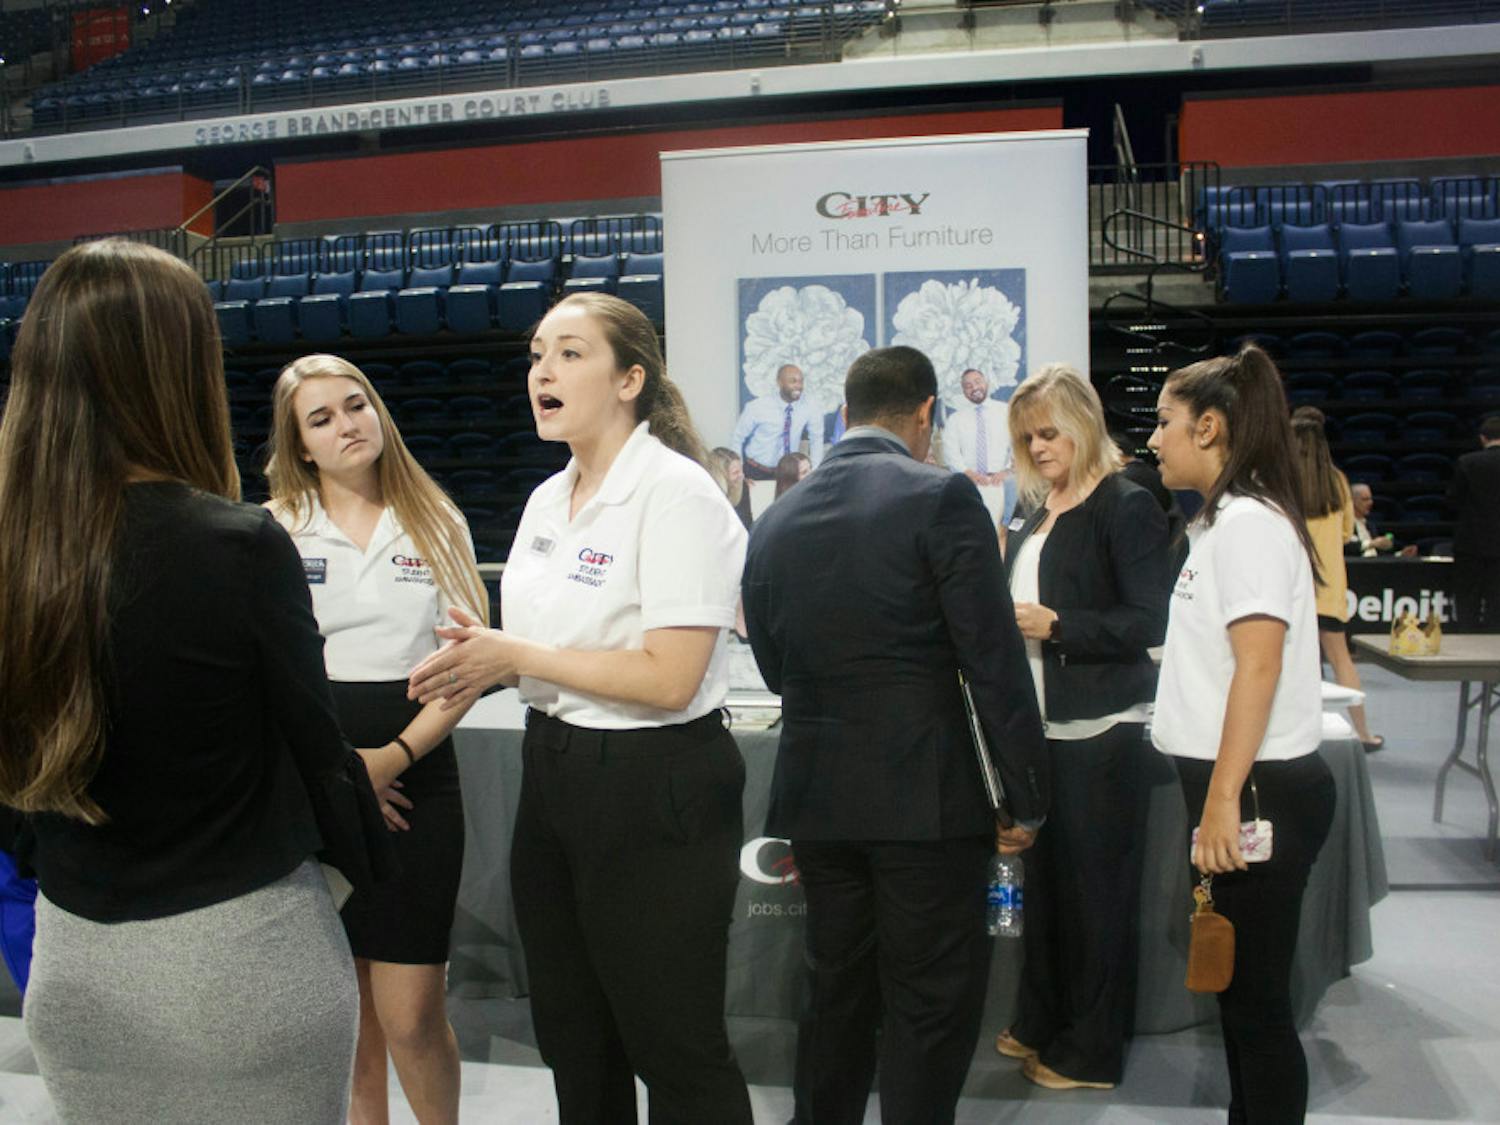 Companies like City Furniture and many more provided booths where students were able to speak with future employers at the Career Showcase.